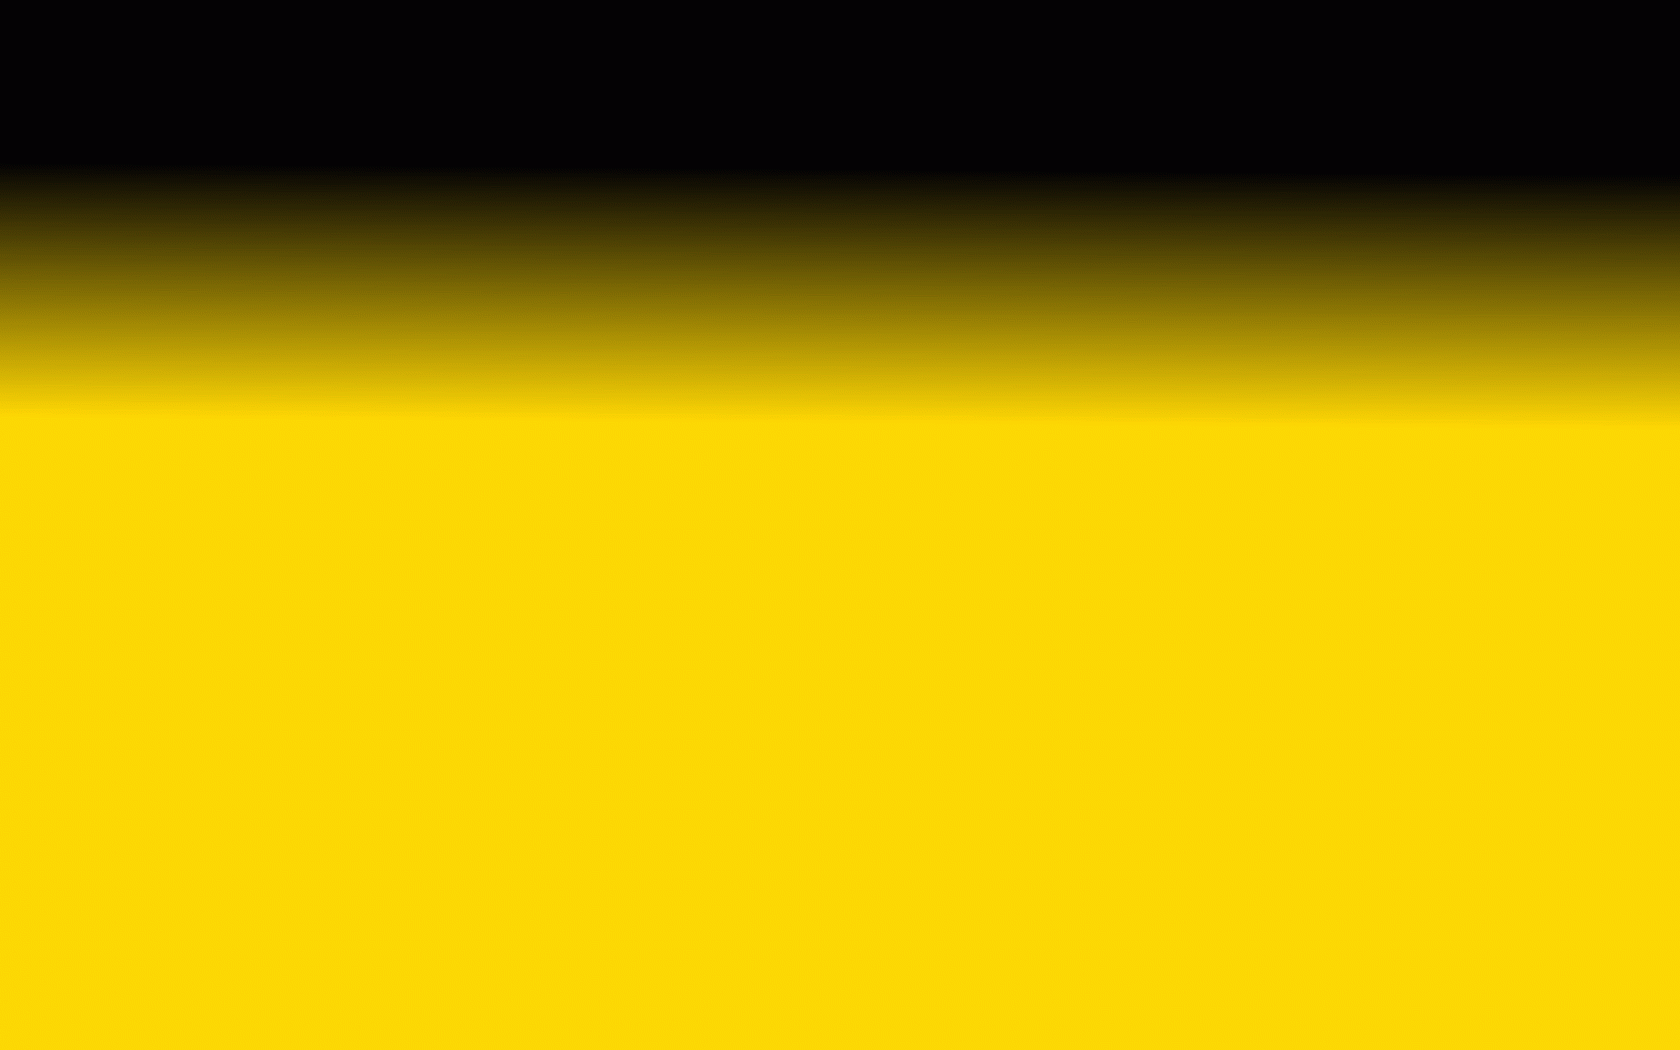 Free download Nothing found for Black yellow gradient desktop wallpaper [1920x1080] for your Desktop, Mobile & Tablet. Explore Small Print Yellow Wallpaper. Country Small Print Wallpaper, Small Print Wallpaper